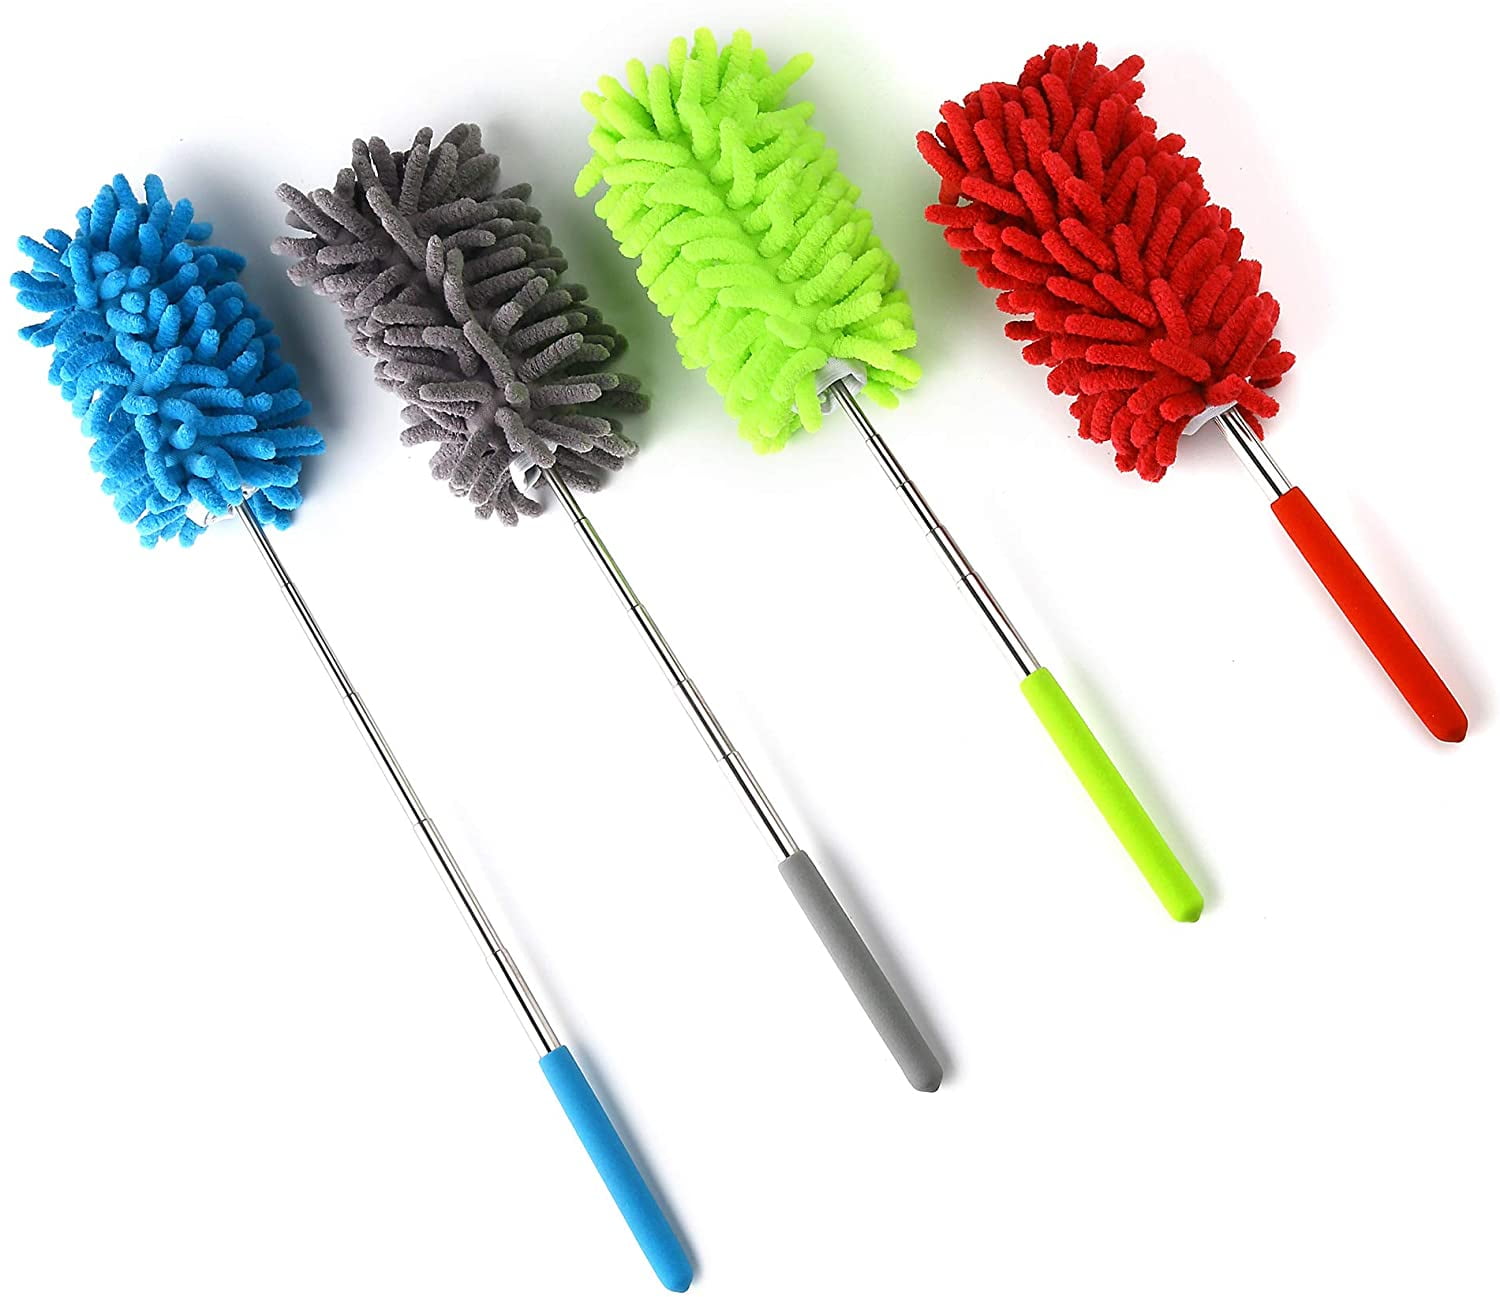 Soft Microfiber Duster Cleaner Wiper Sweeper Cleaning Dust Home Office Car Tool 